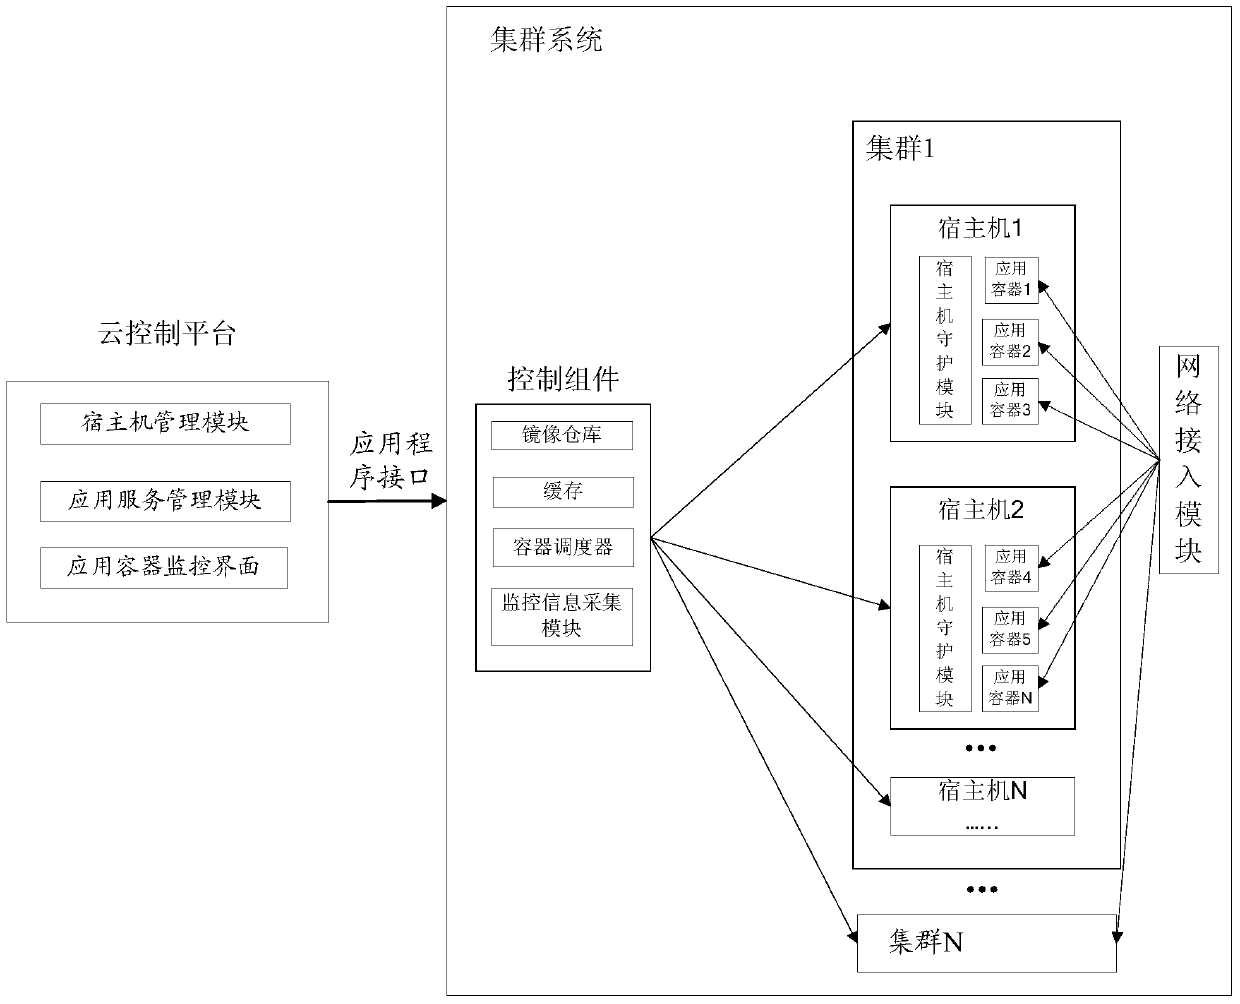 Application management method and system based on application container